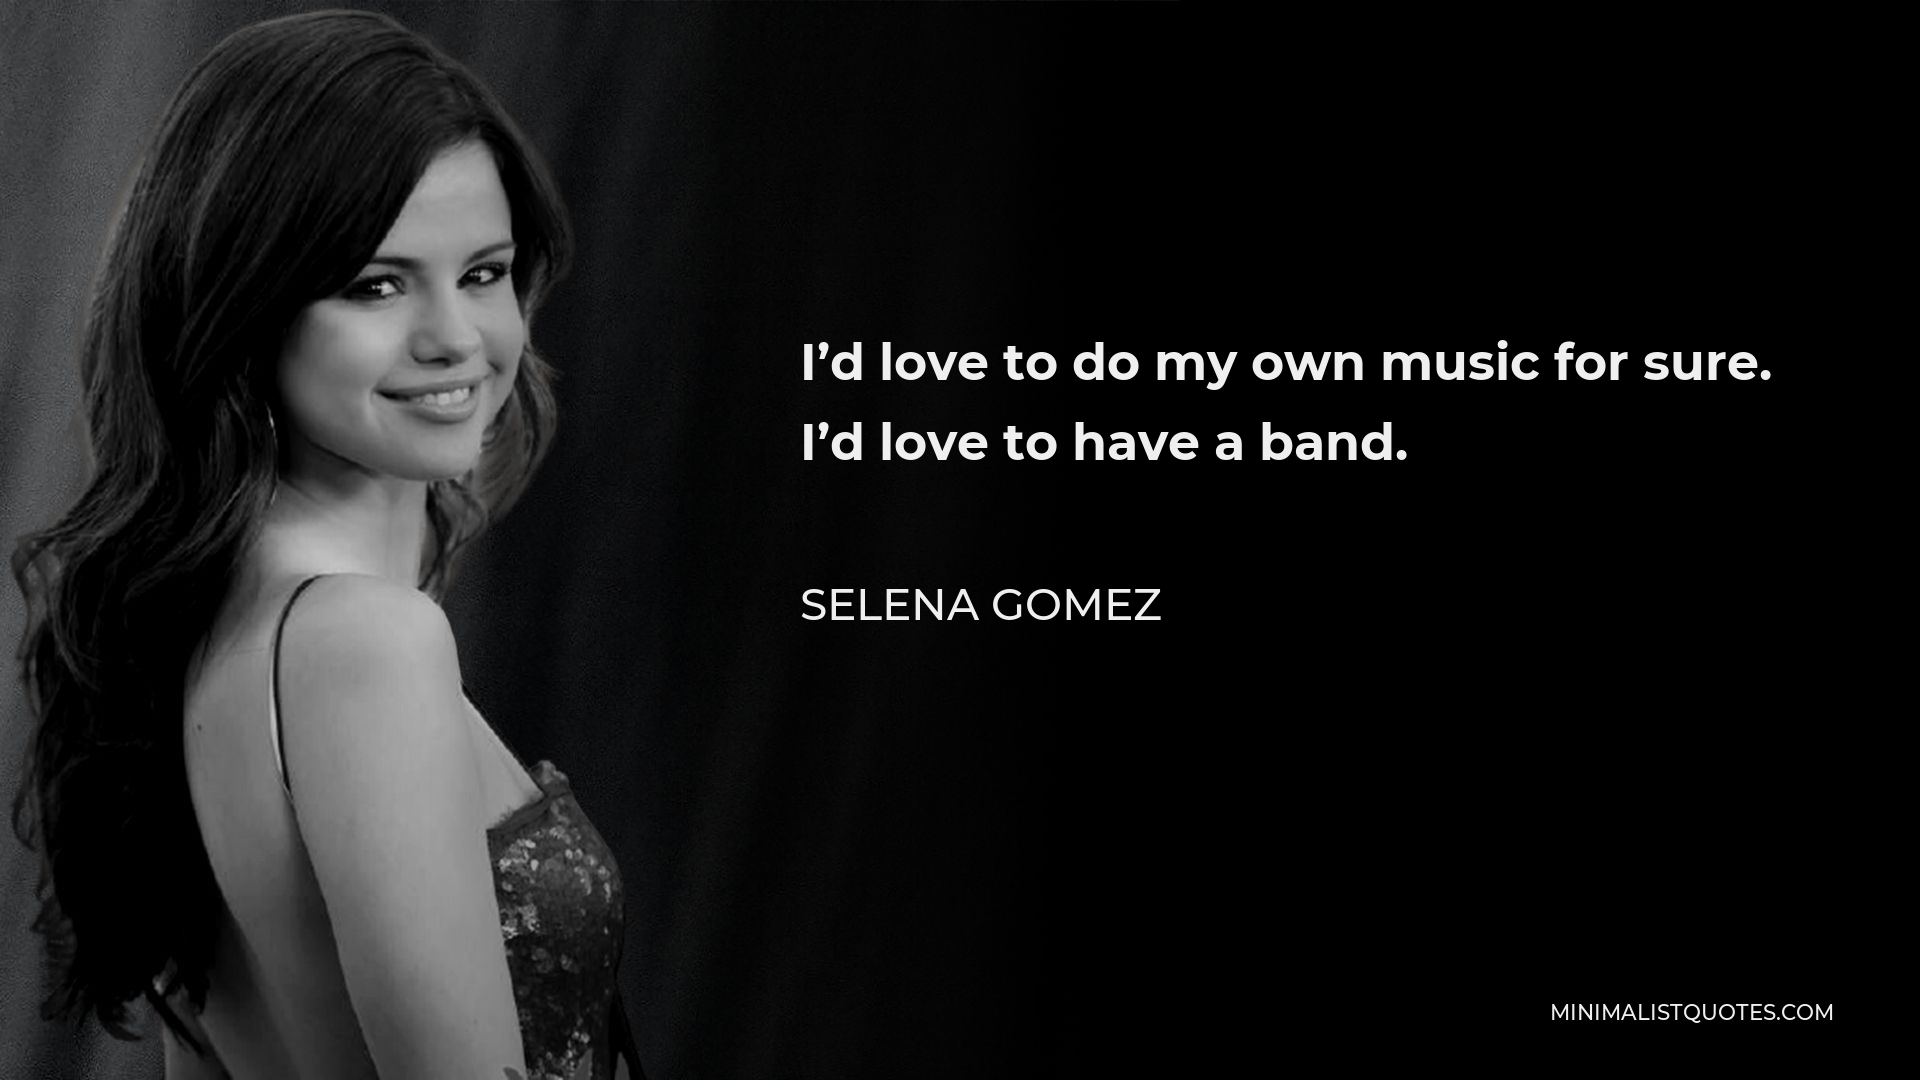 Selena Gomez Quote - I’d love to do my own music for sure. I’d love to have a band.